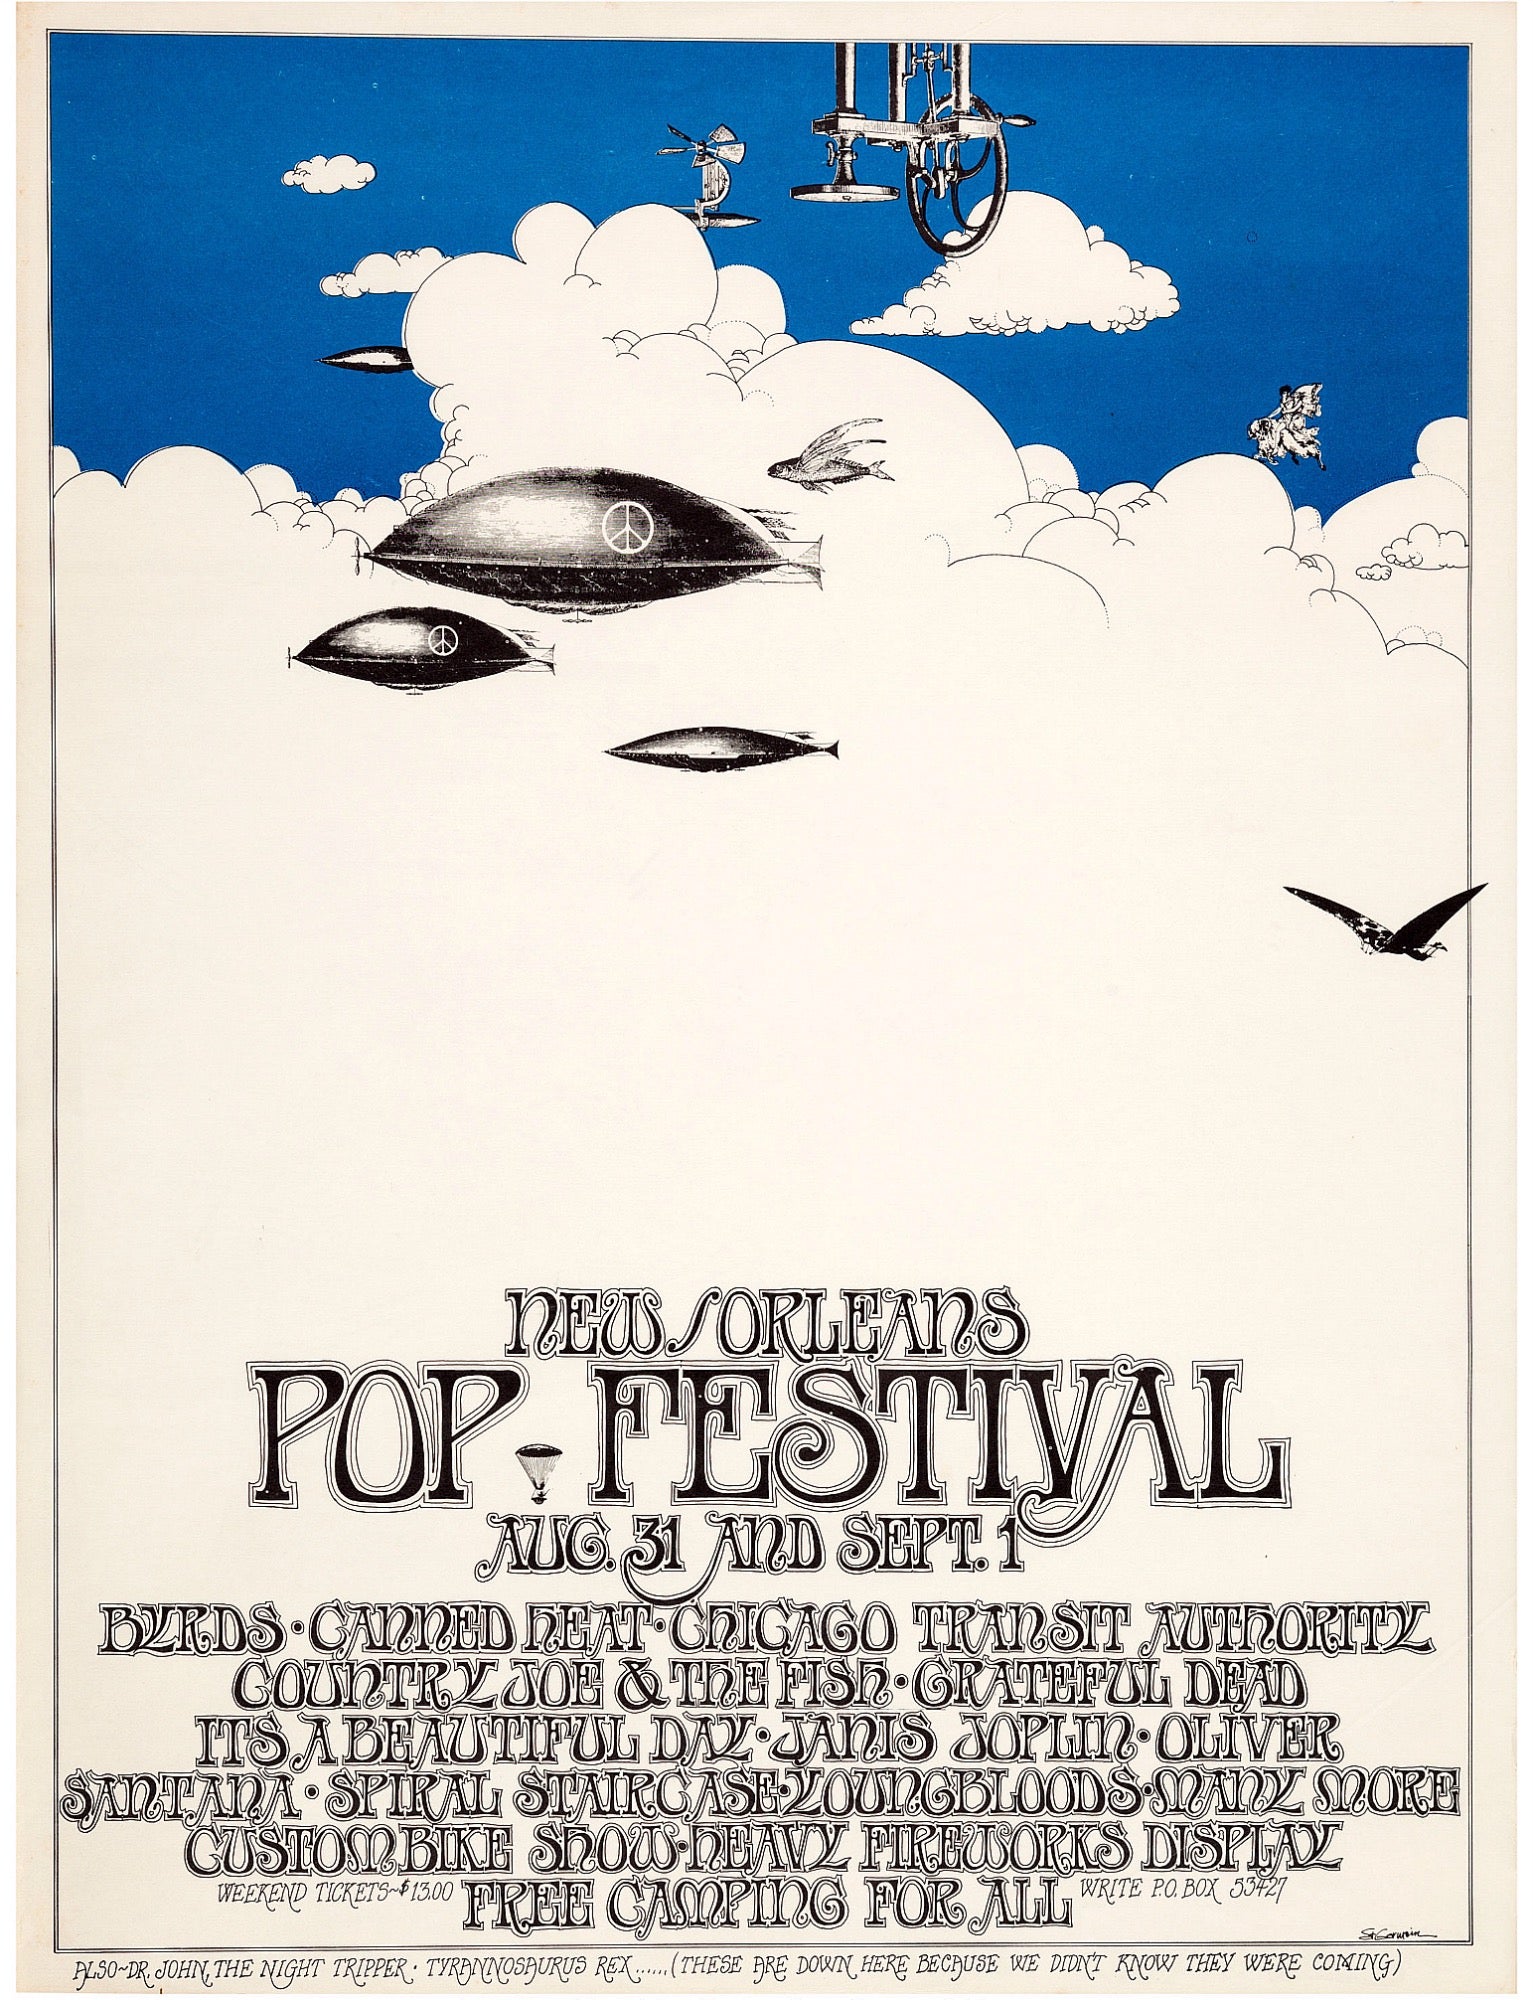 New Orleans Pop Festival, Labor Day, 1969